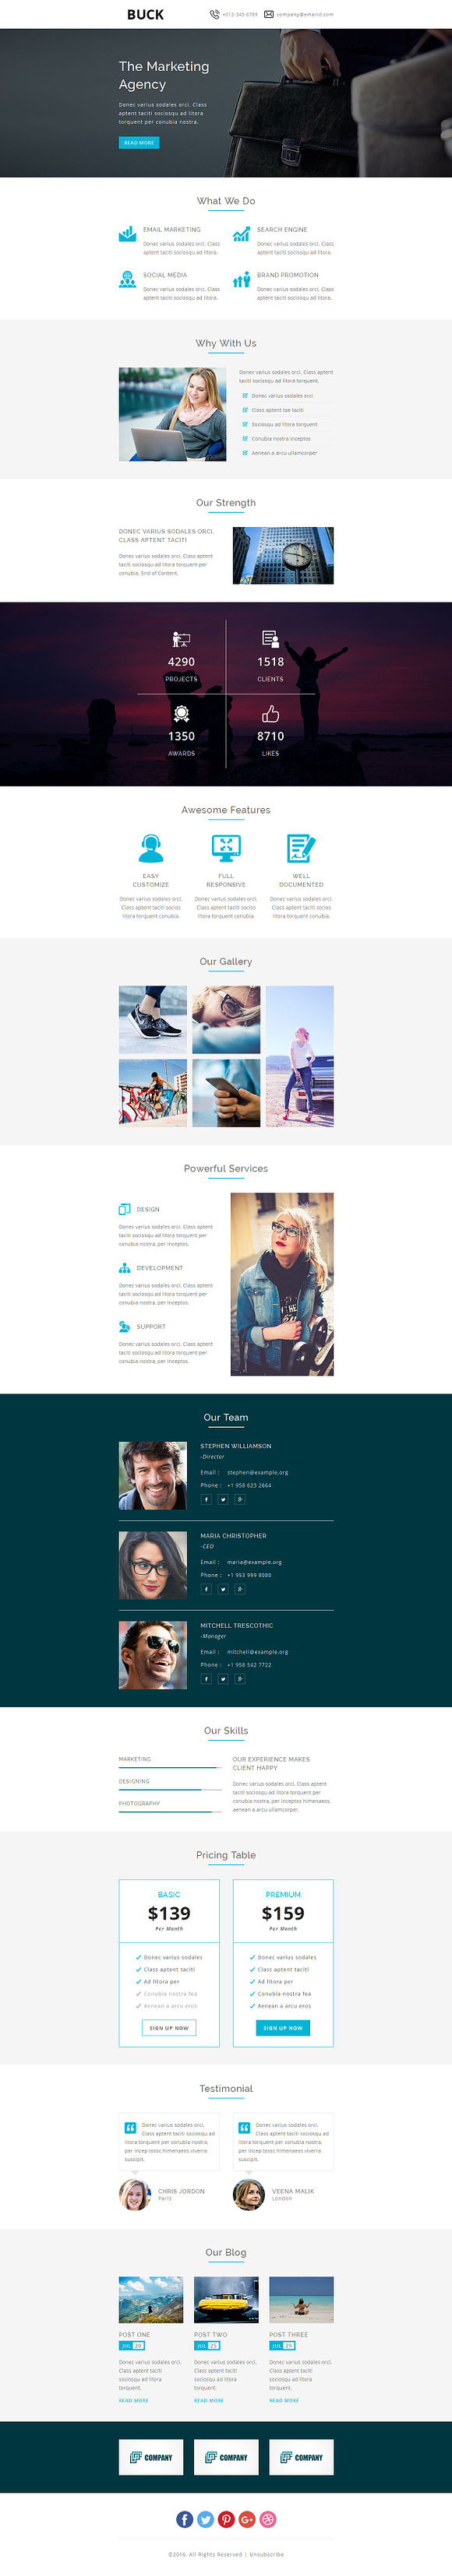 BUCK - Responsive Email Template in Mailchimp Templates - product preview 1